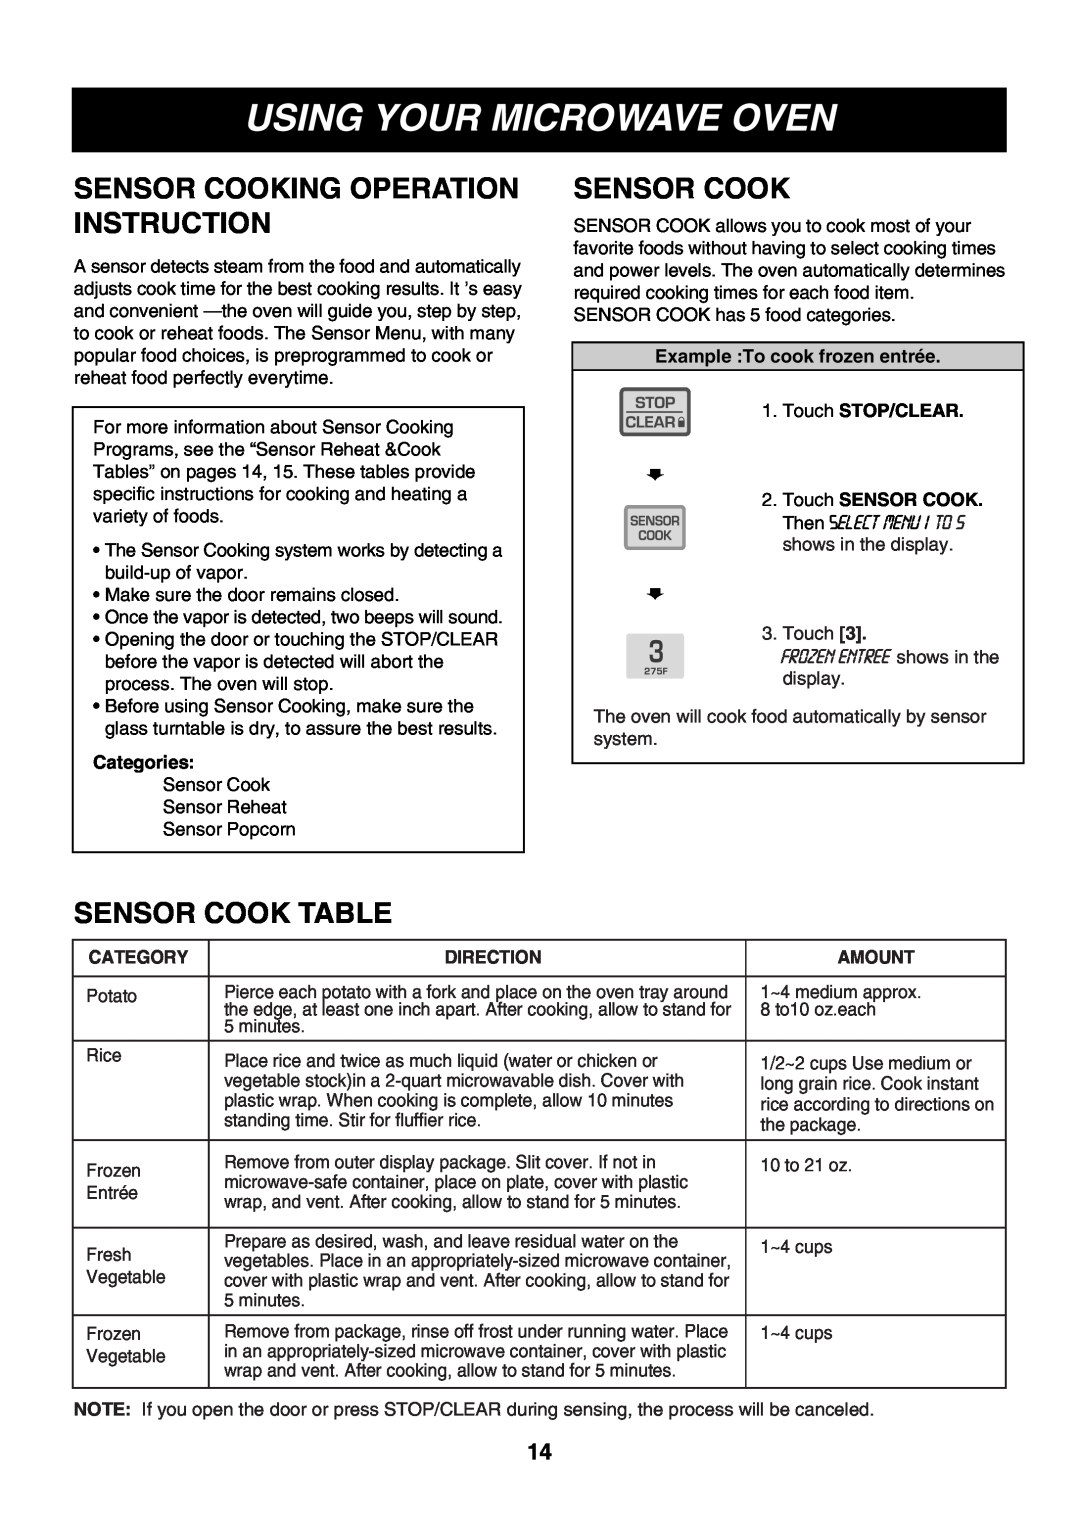 LG Electronics LMH1017CVW Sensor Cooking Operation Instruction, Sensor Cook Table, Categories, Touch SENSOR COOK, Category 